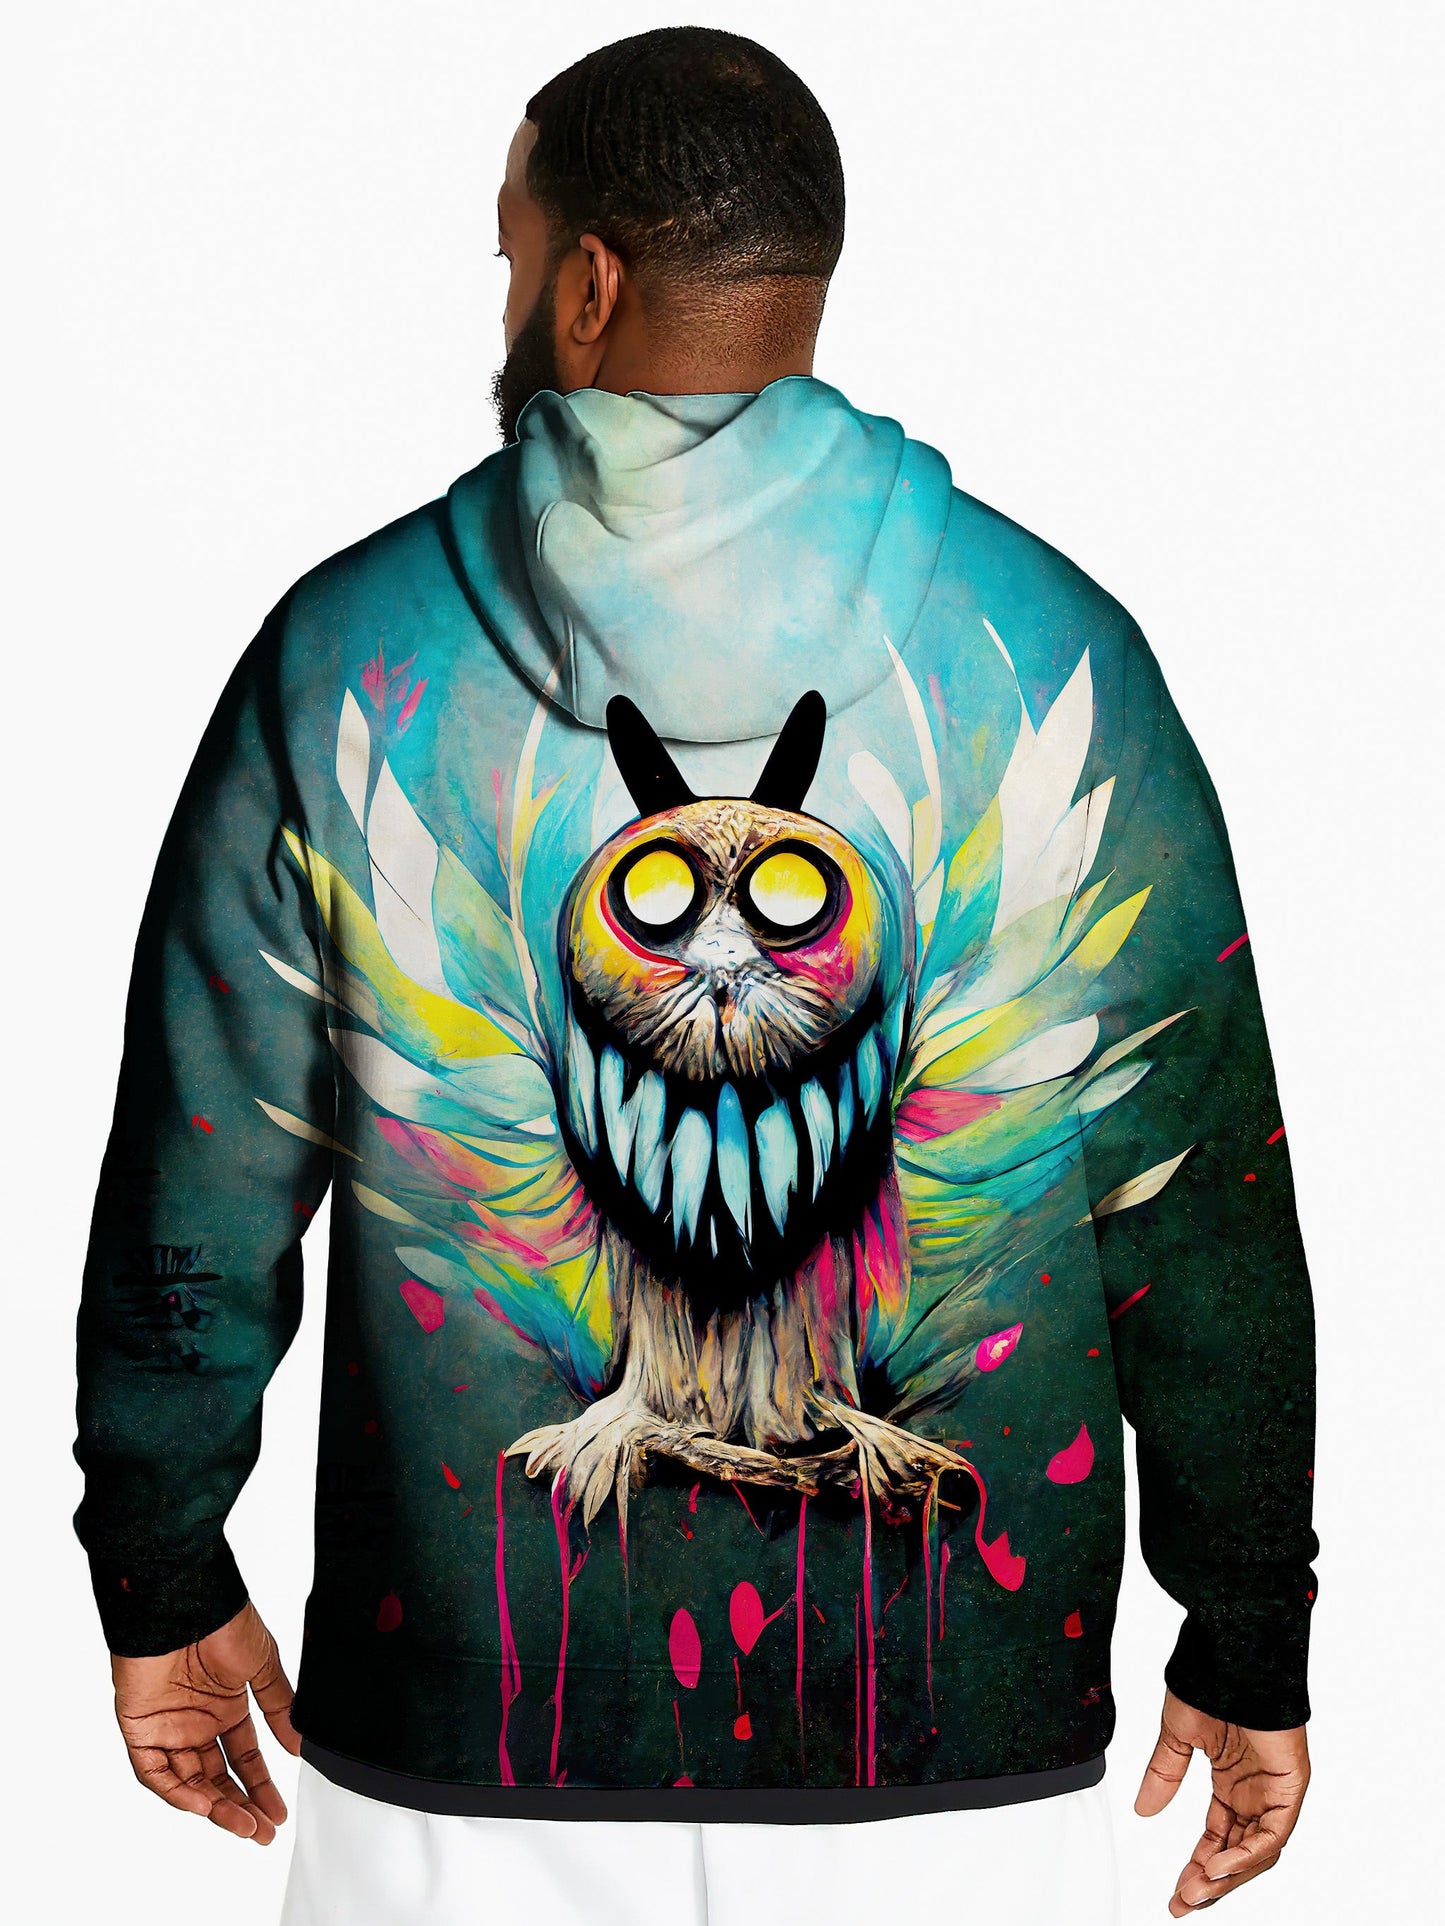 Fickle Change Unisex Pullover Hoodie - EDM Festival Clothing - Boogie Threads